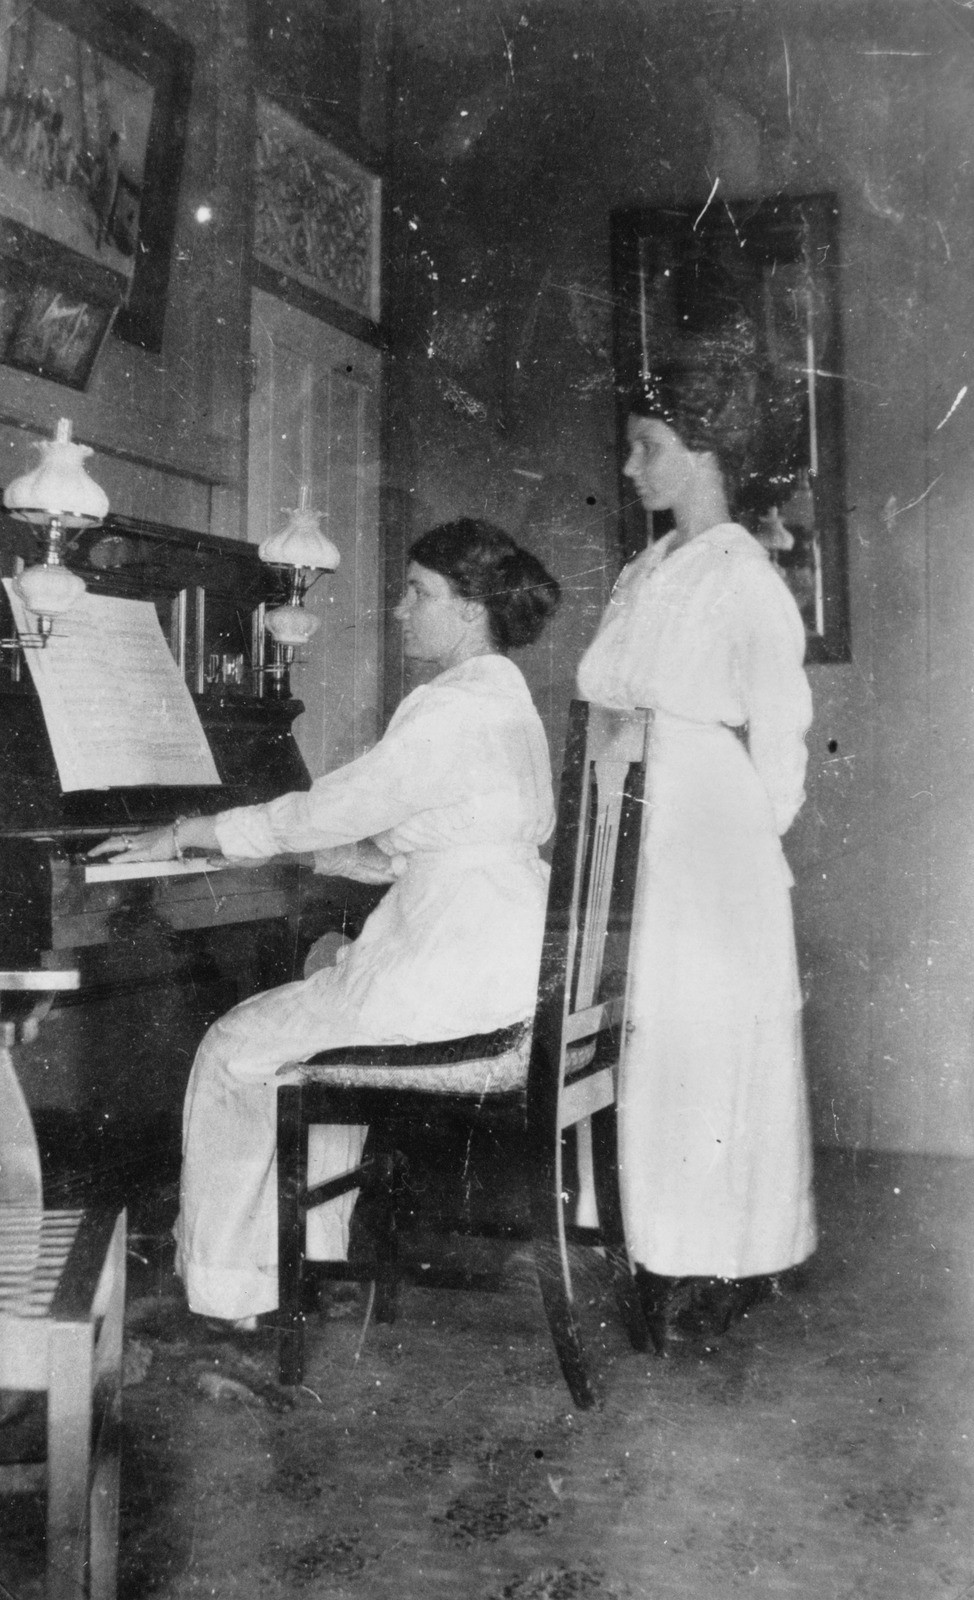 Olive Victoria Filsell Sedgley plays the piano at her home in Taringa Brisbane while her sister Lydia Goodliff Filsell Sandercock watches 1916